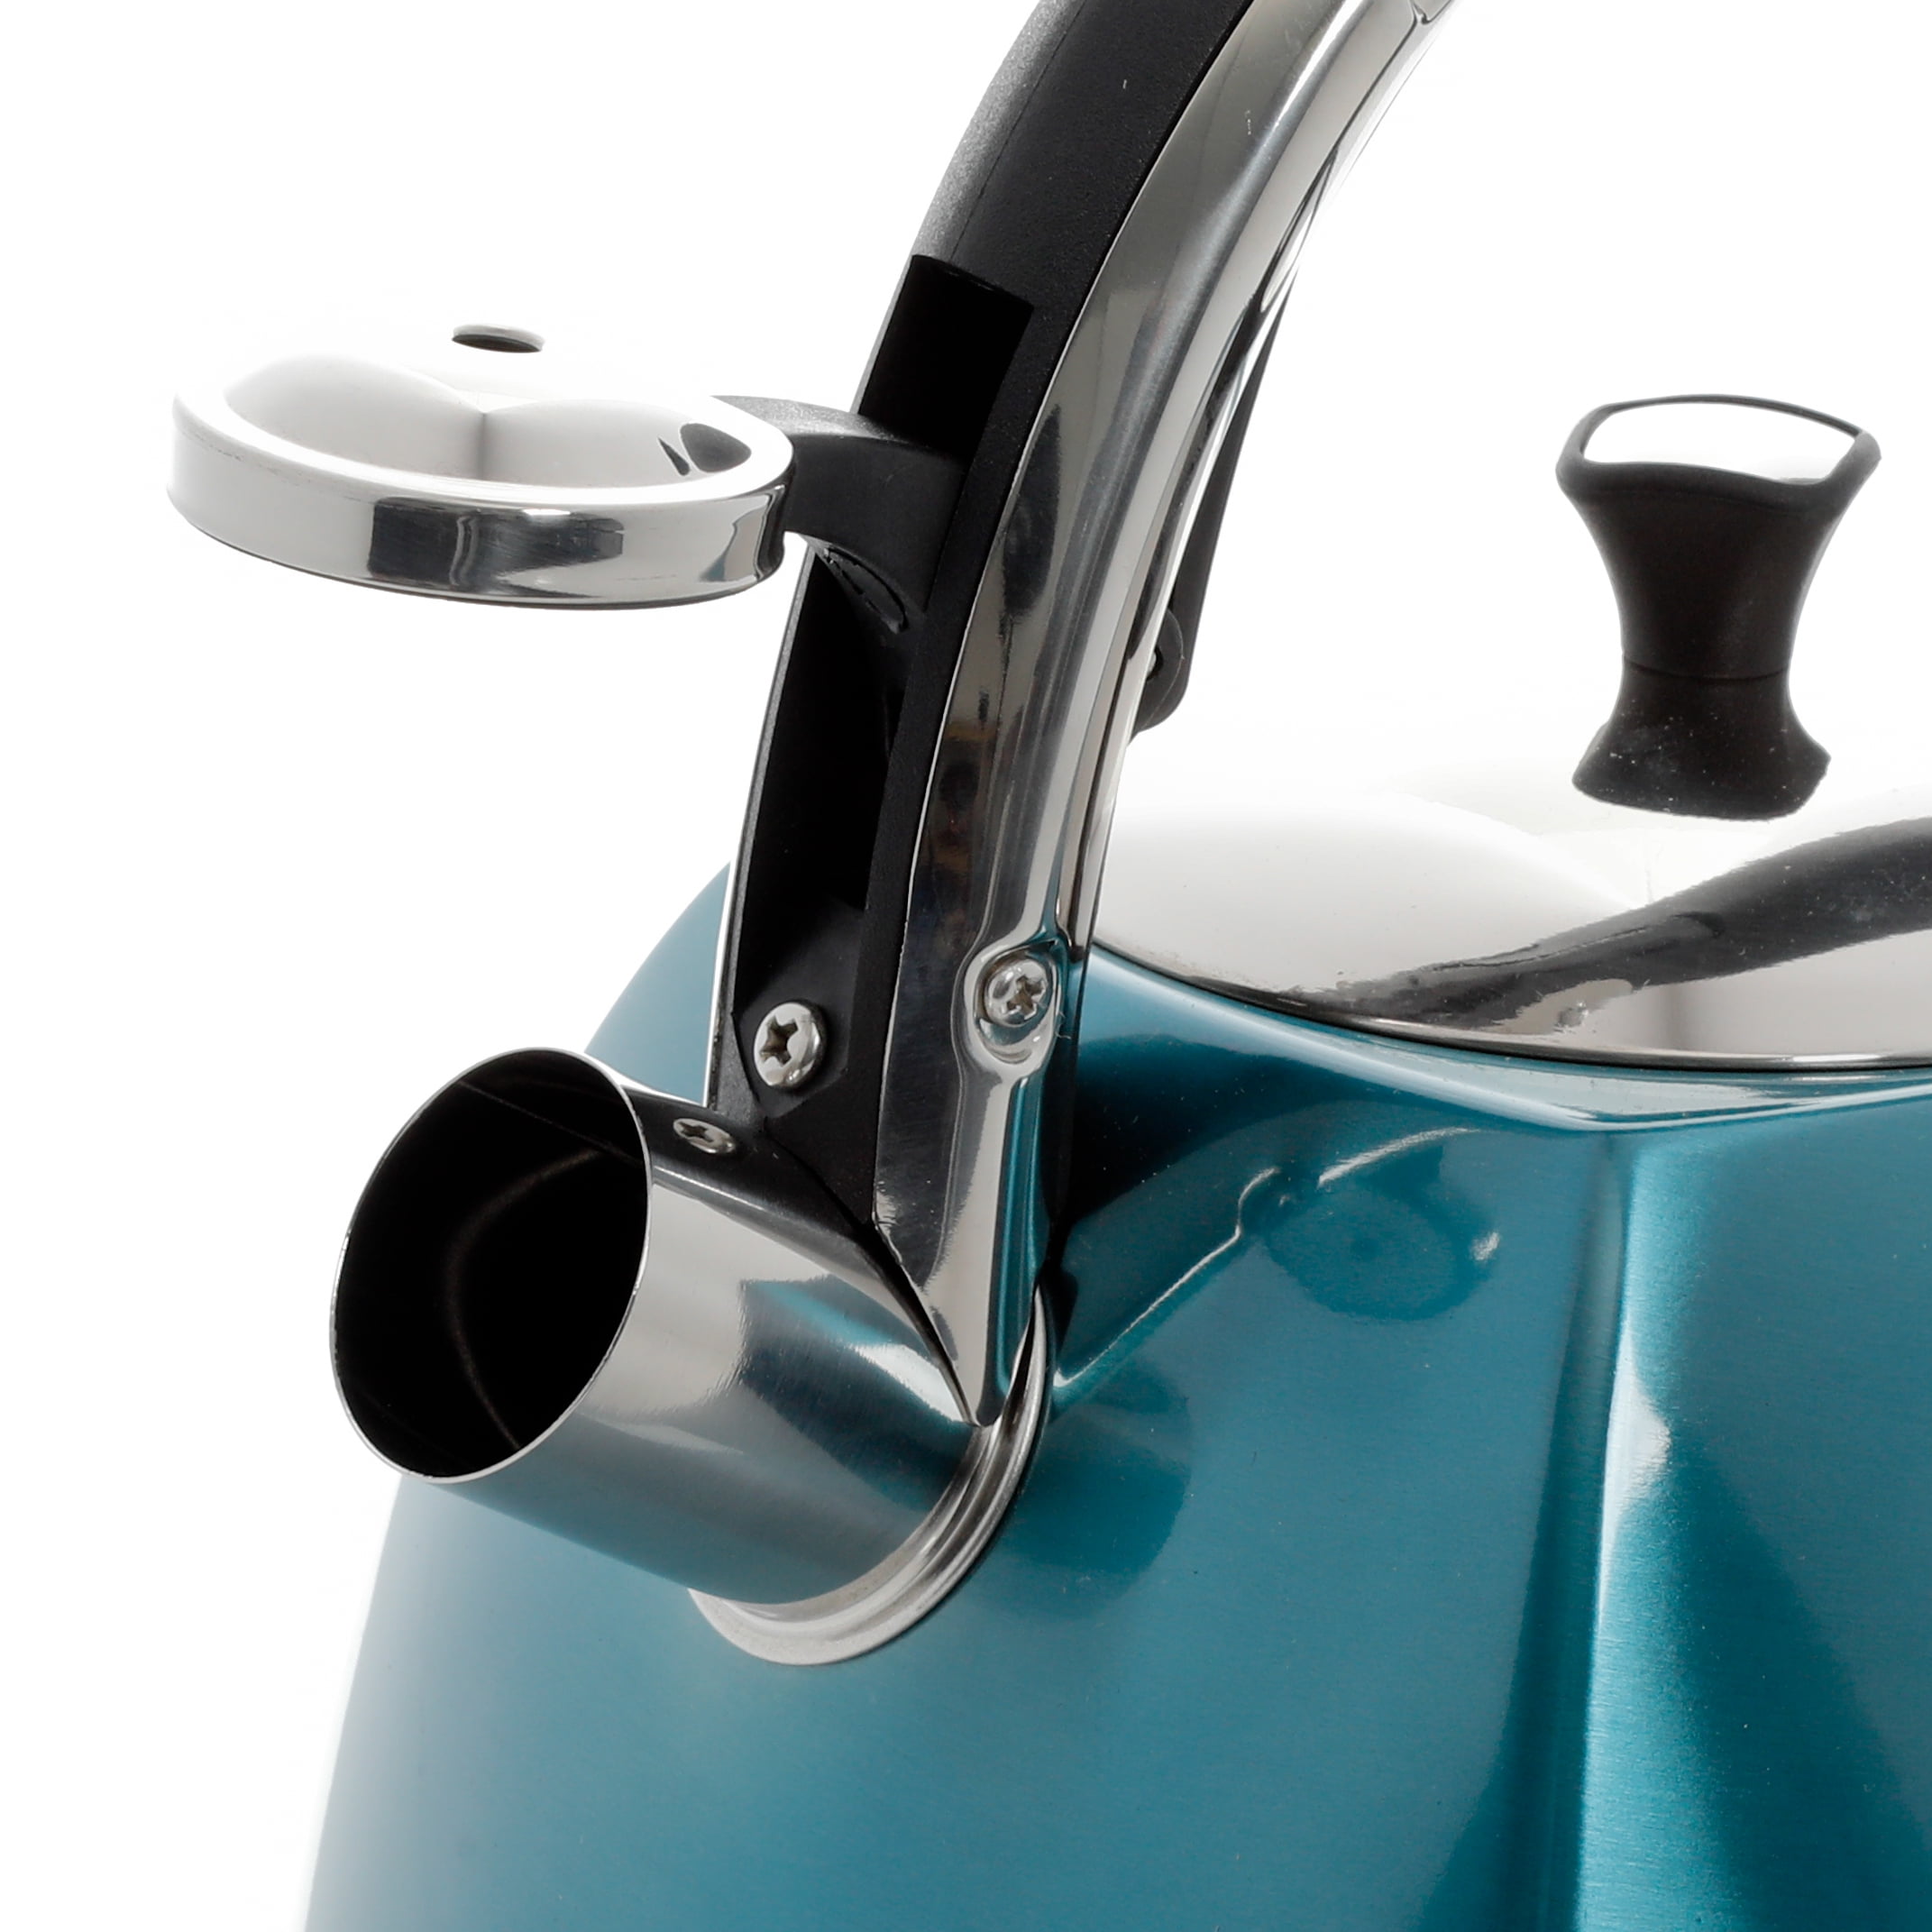 Mr. Coffee 2.5 Quart Stainless Steel Whistling Tea Kettle In Turquoise, Coffee, Tea & Espresso, Furniture & Appliances